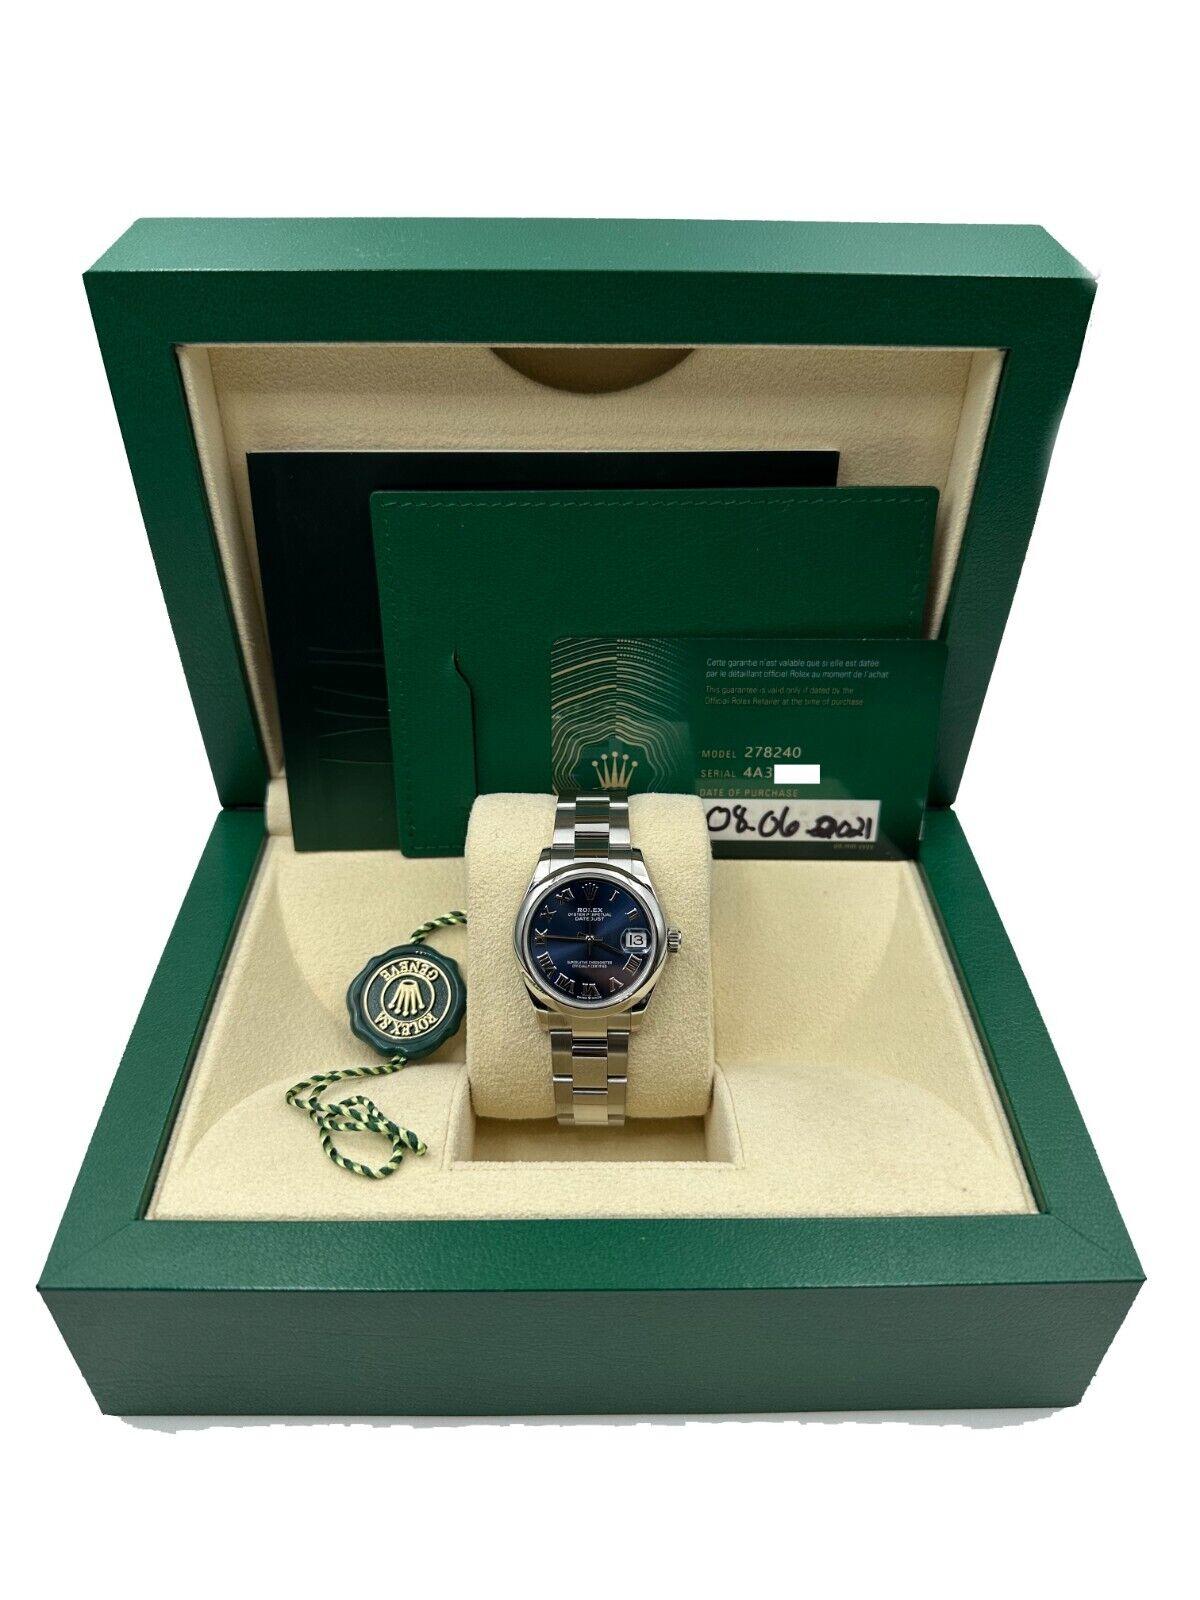 Serial: 4A39F***

Year: 2021

Model: Midsize Datejust

Case Material: Stainless Steel

Band: Stainless Steel  

Bezel: Stainless Steel
  
Dial: Blue Roman Dial

Face: Sapphire Crystal

Case Size: 31mm

Includes: 

-Rolex Box & Papers

-Certified